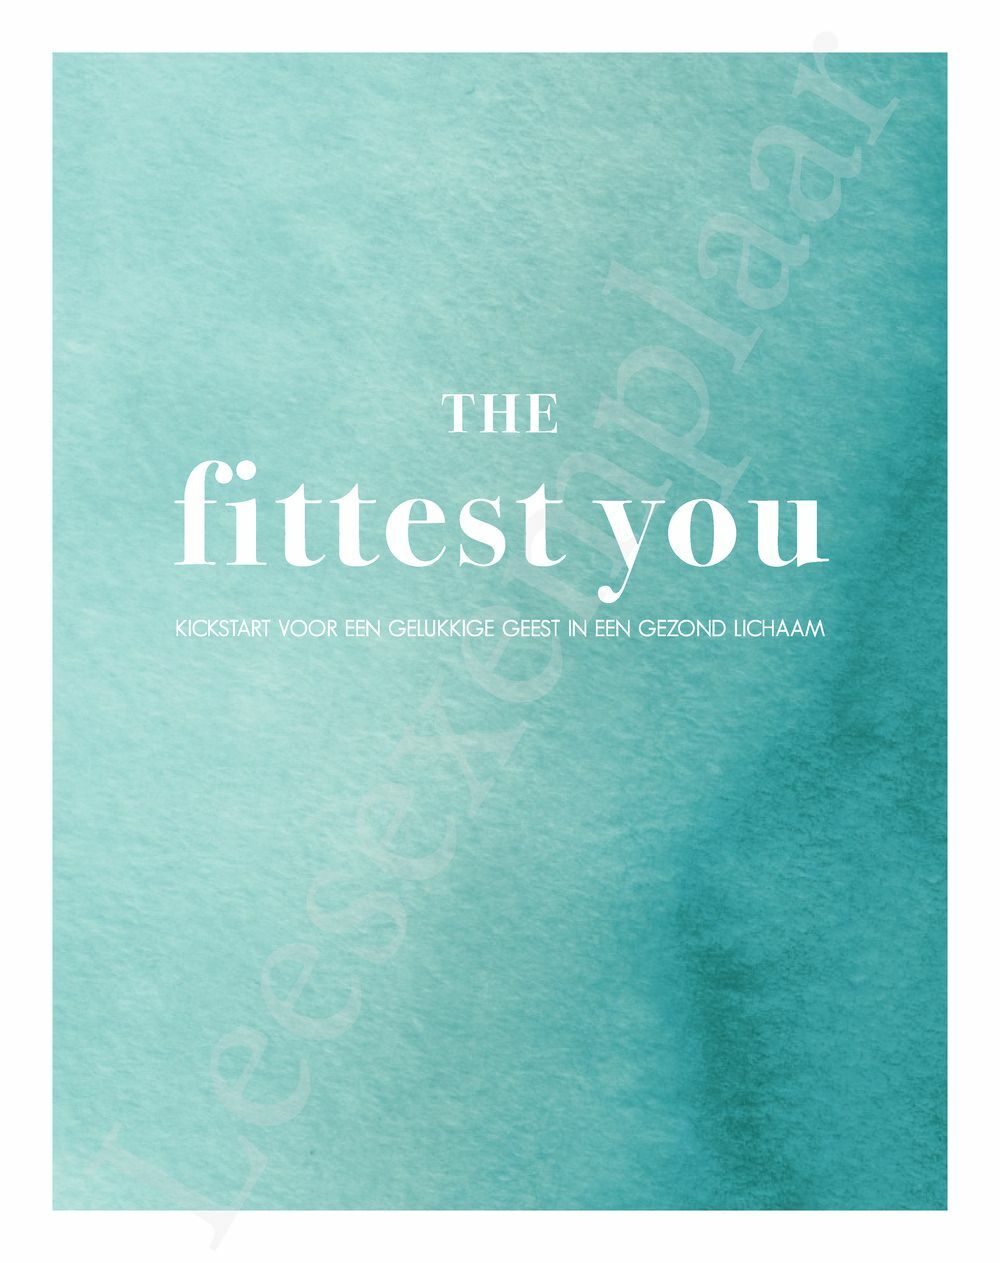 Preview: The fittest you